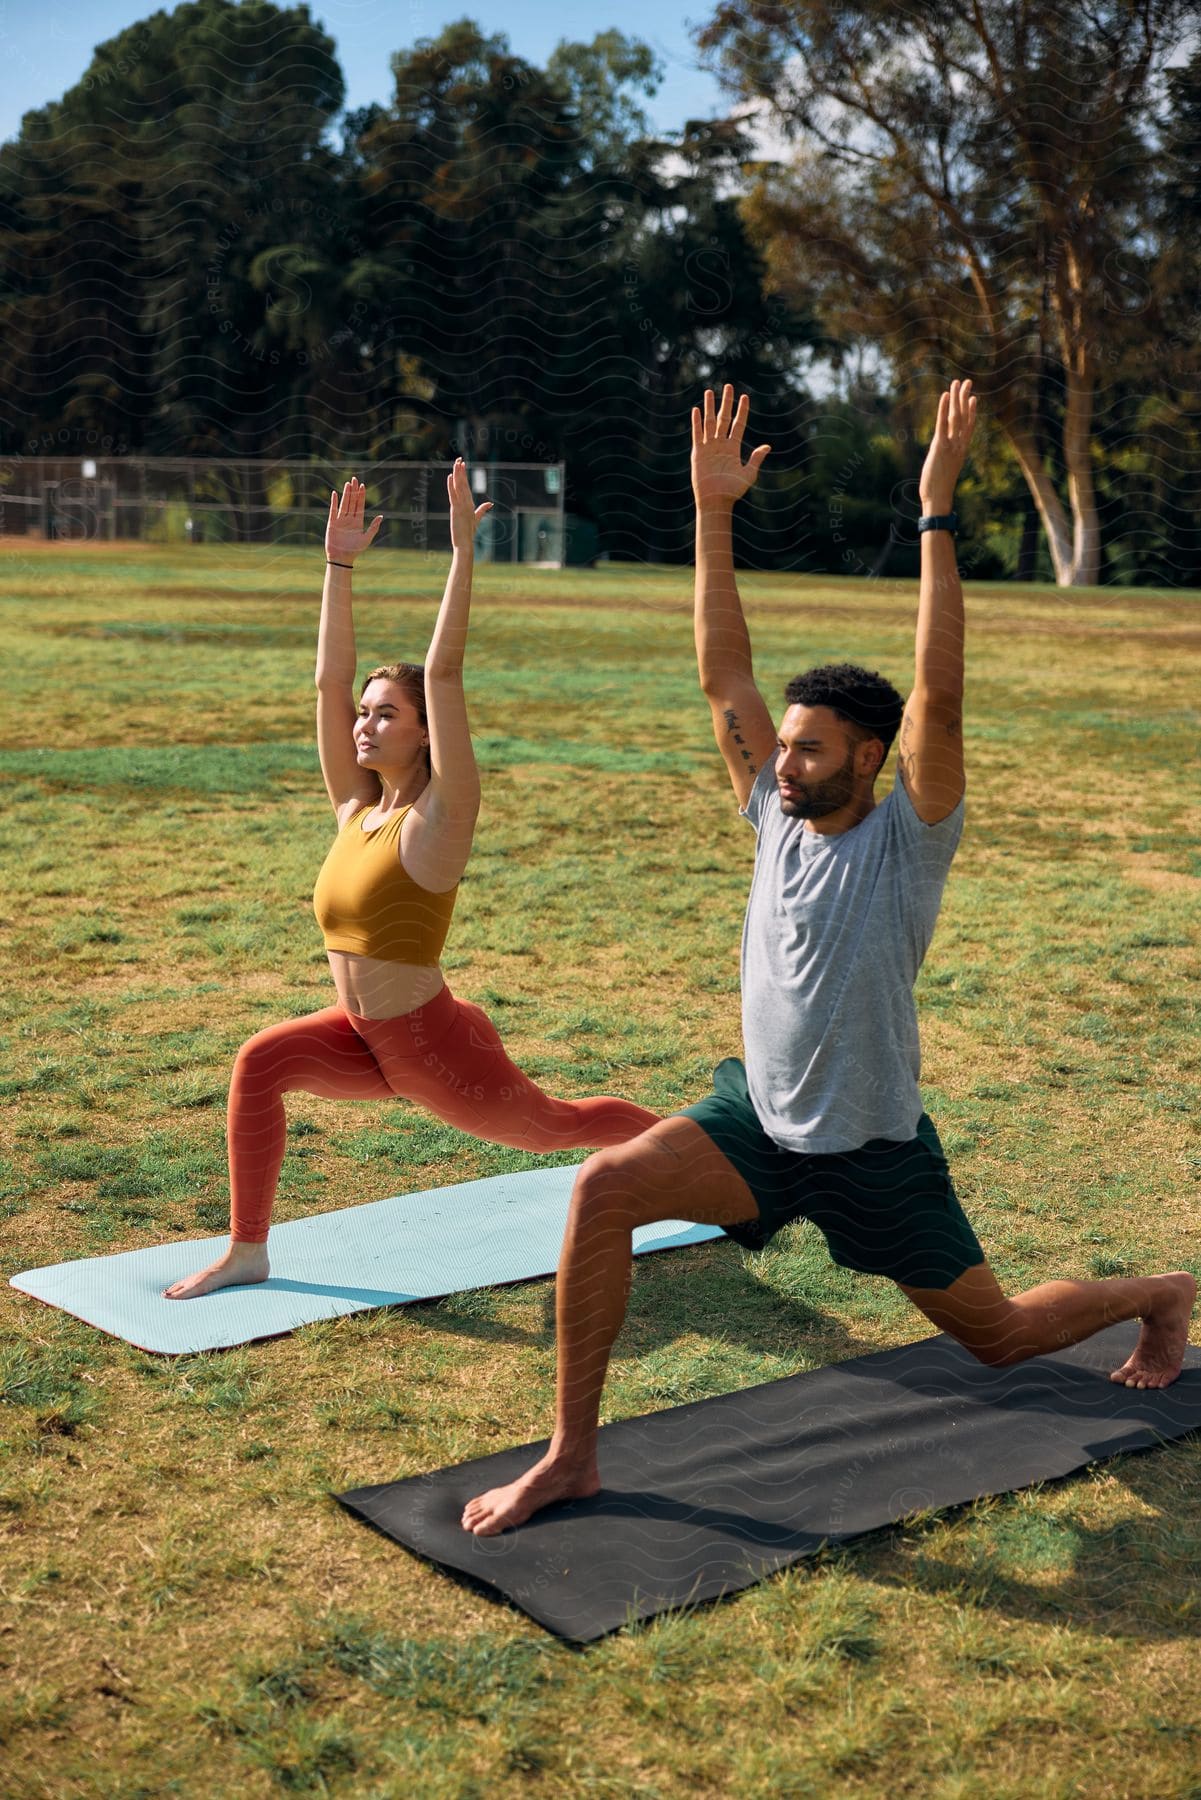 man and a woman doing yoga on a grass field during the day